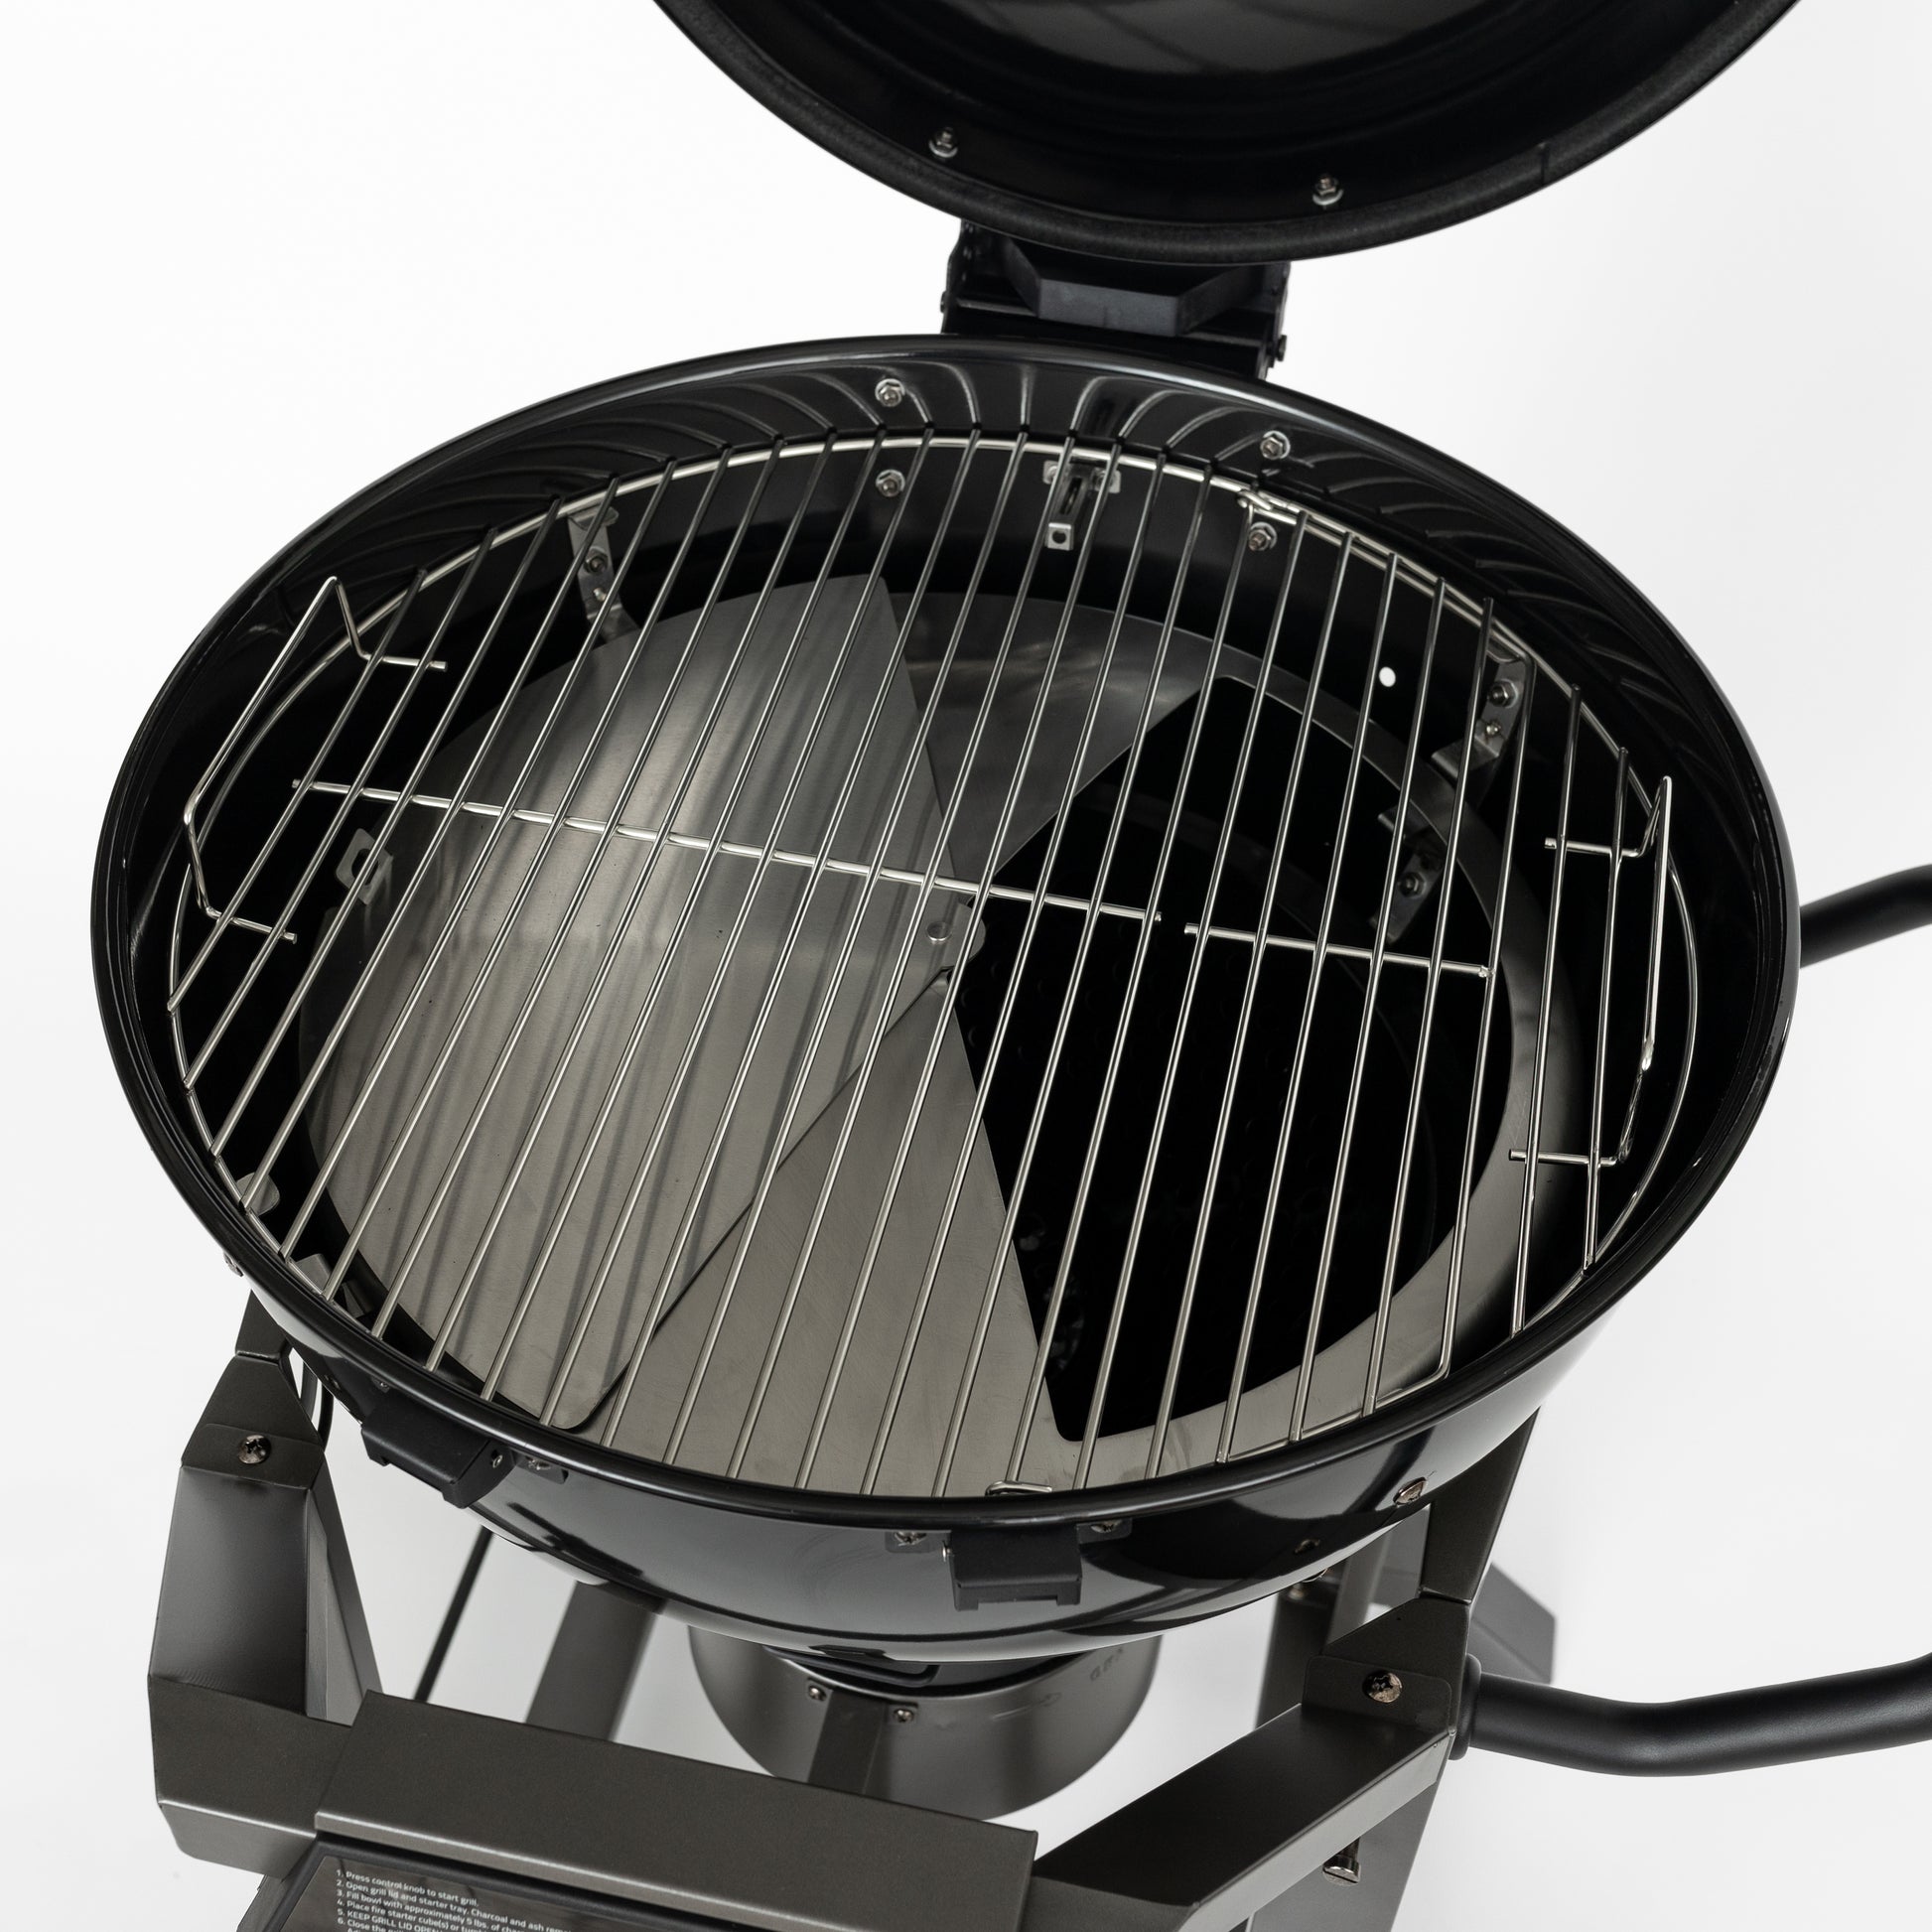 the Smart Grill™